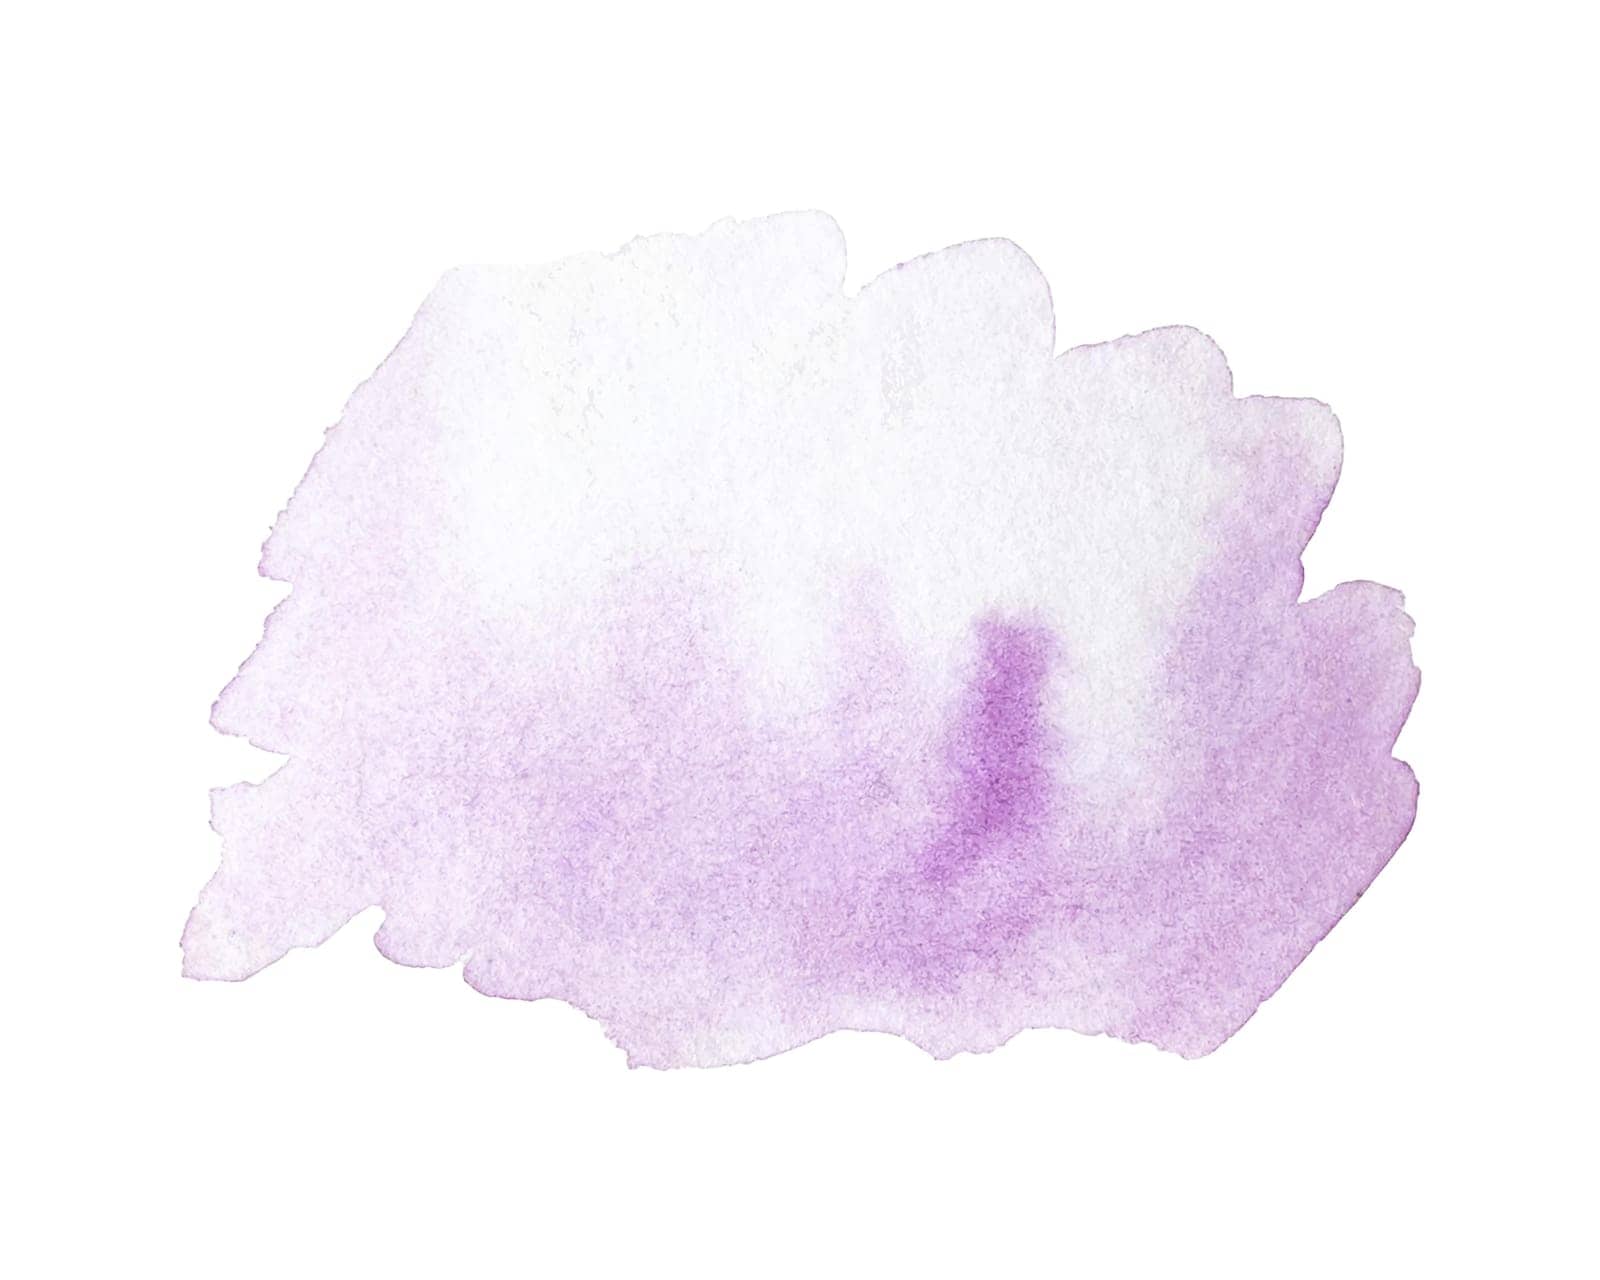 Watercolor pink violet spot texture isolated on white background. Vector illustration